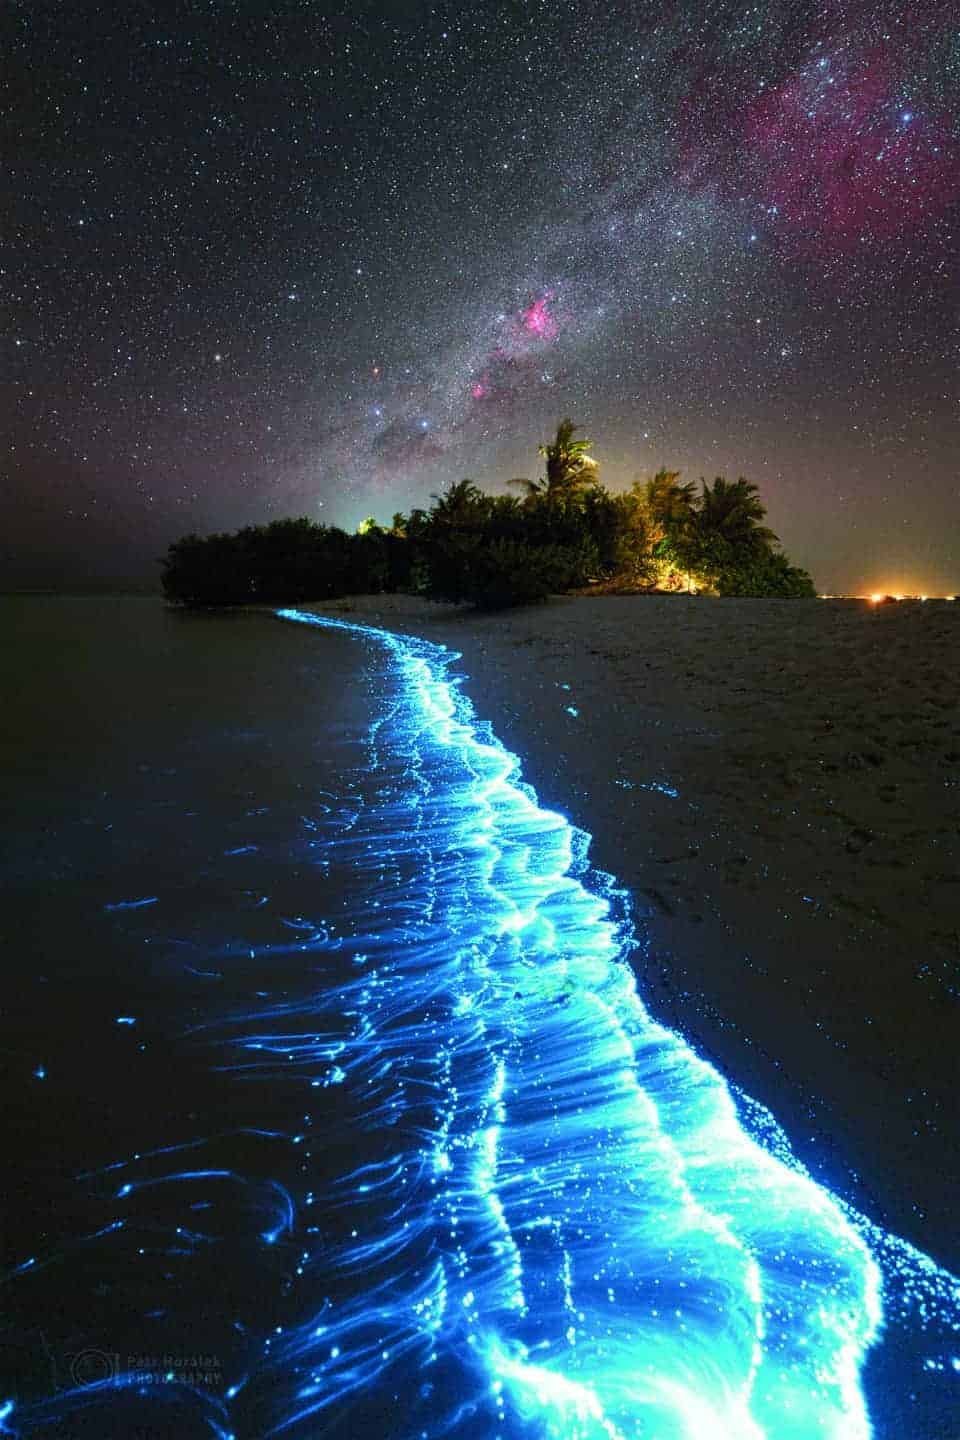 A mind-enriching blue glow on the beach at night.